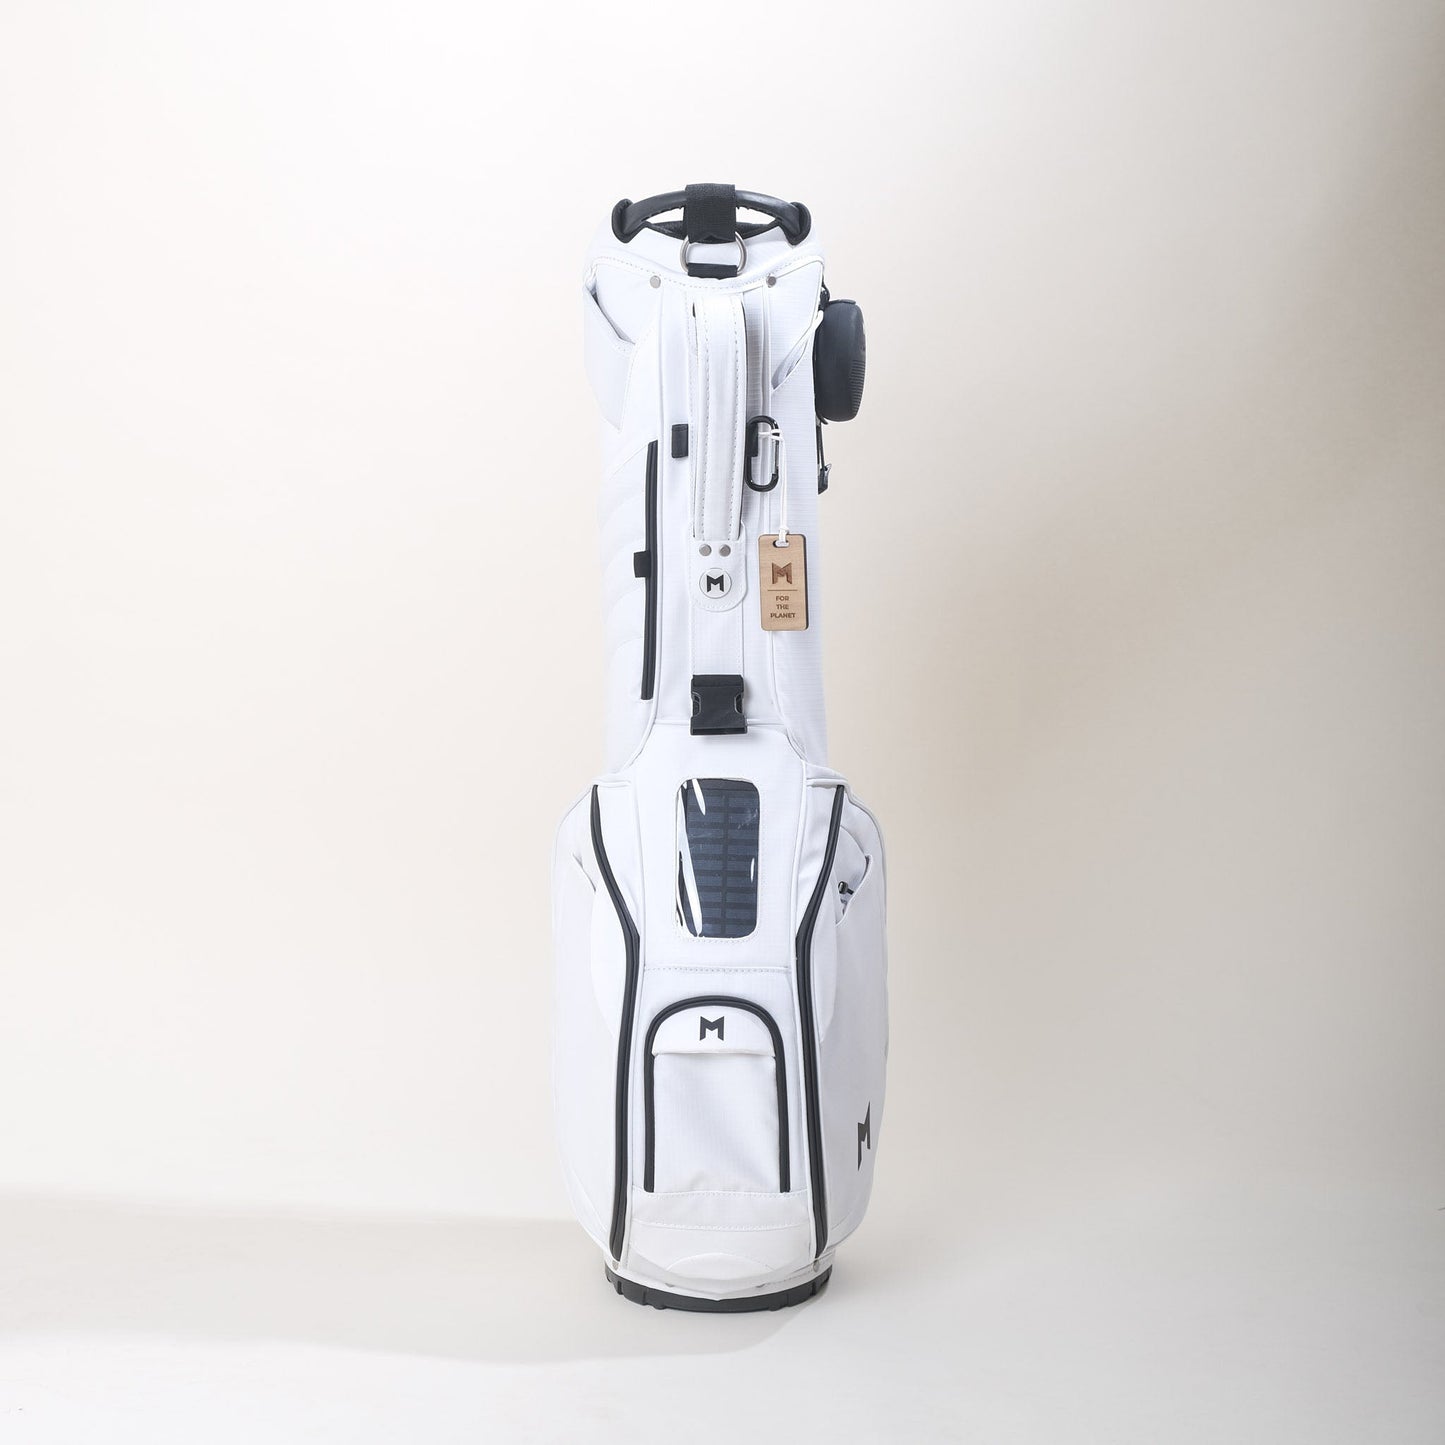 White MNML GOLF bag available in Trade It Forward Program. Send in your old bag to support a junior golfer.